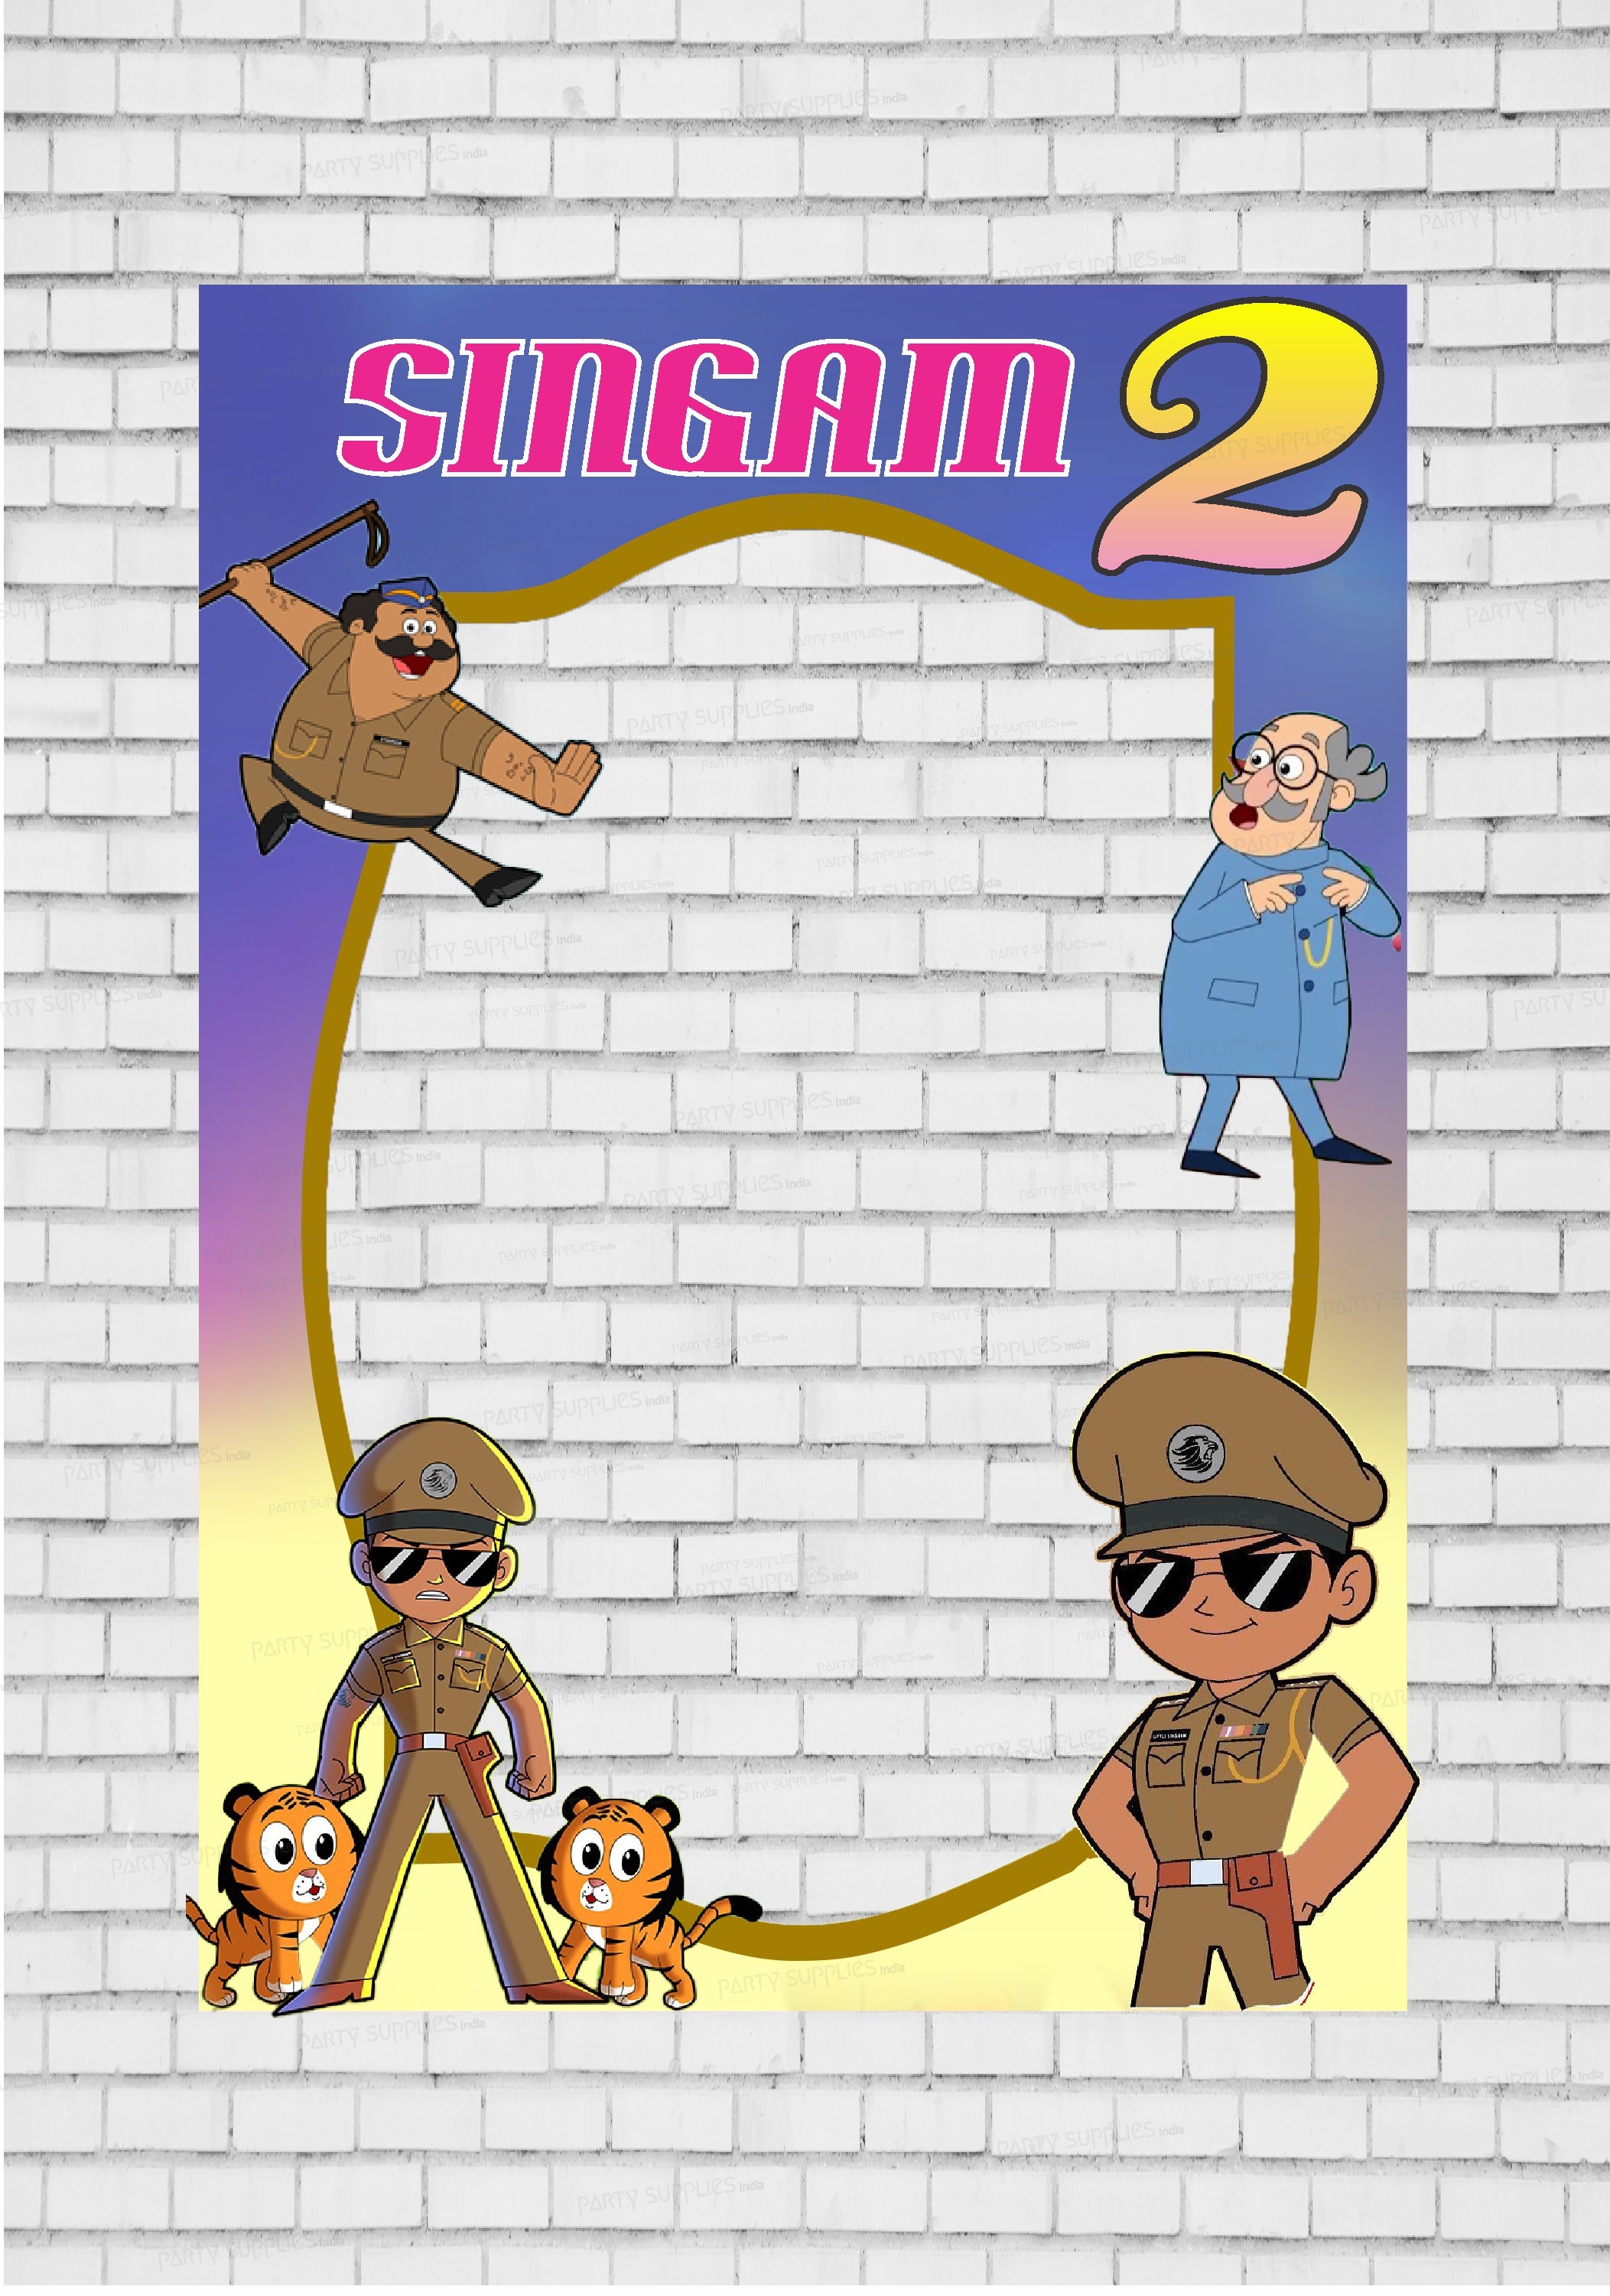 How to Draw Little Singham Cartoon with Lion Step by Step easy - YouTube